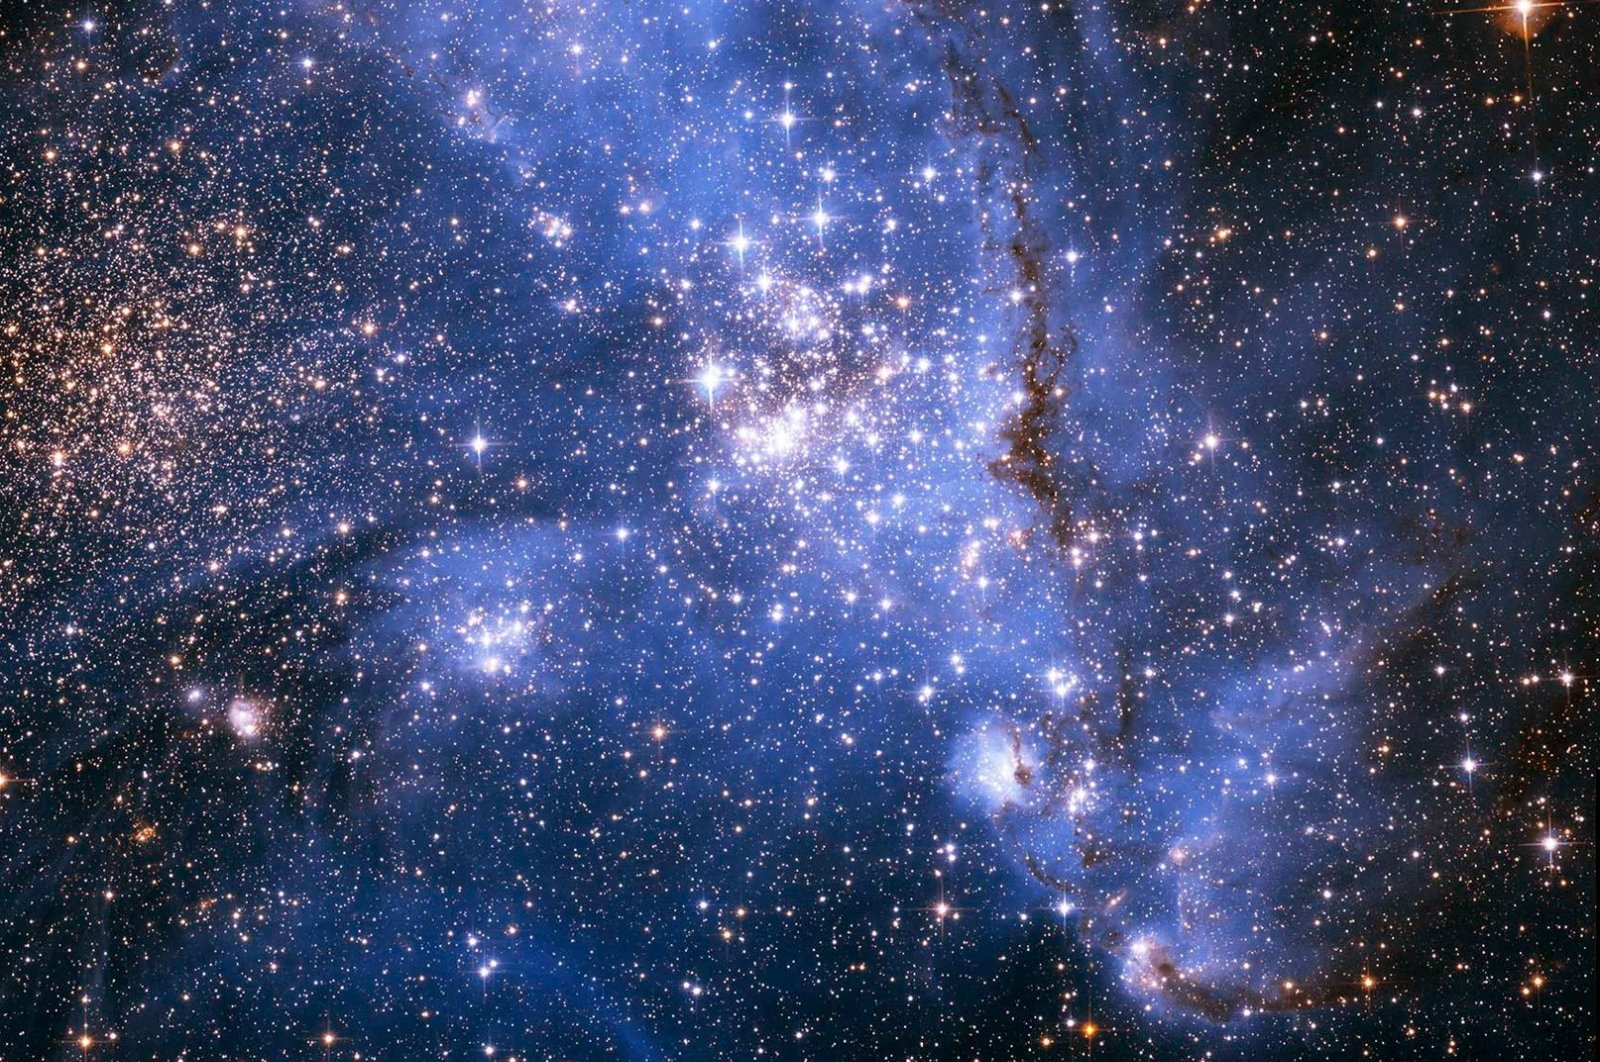 An image captured by the Hubble Telescope shows young stars spiraling into the center of a massive cluster of stars in the Small Magellanic Cloud, a satellite galaxy of the Milky Way, Sept. 8, 2022. (NASA via AFP)